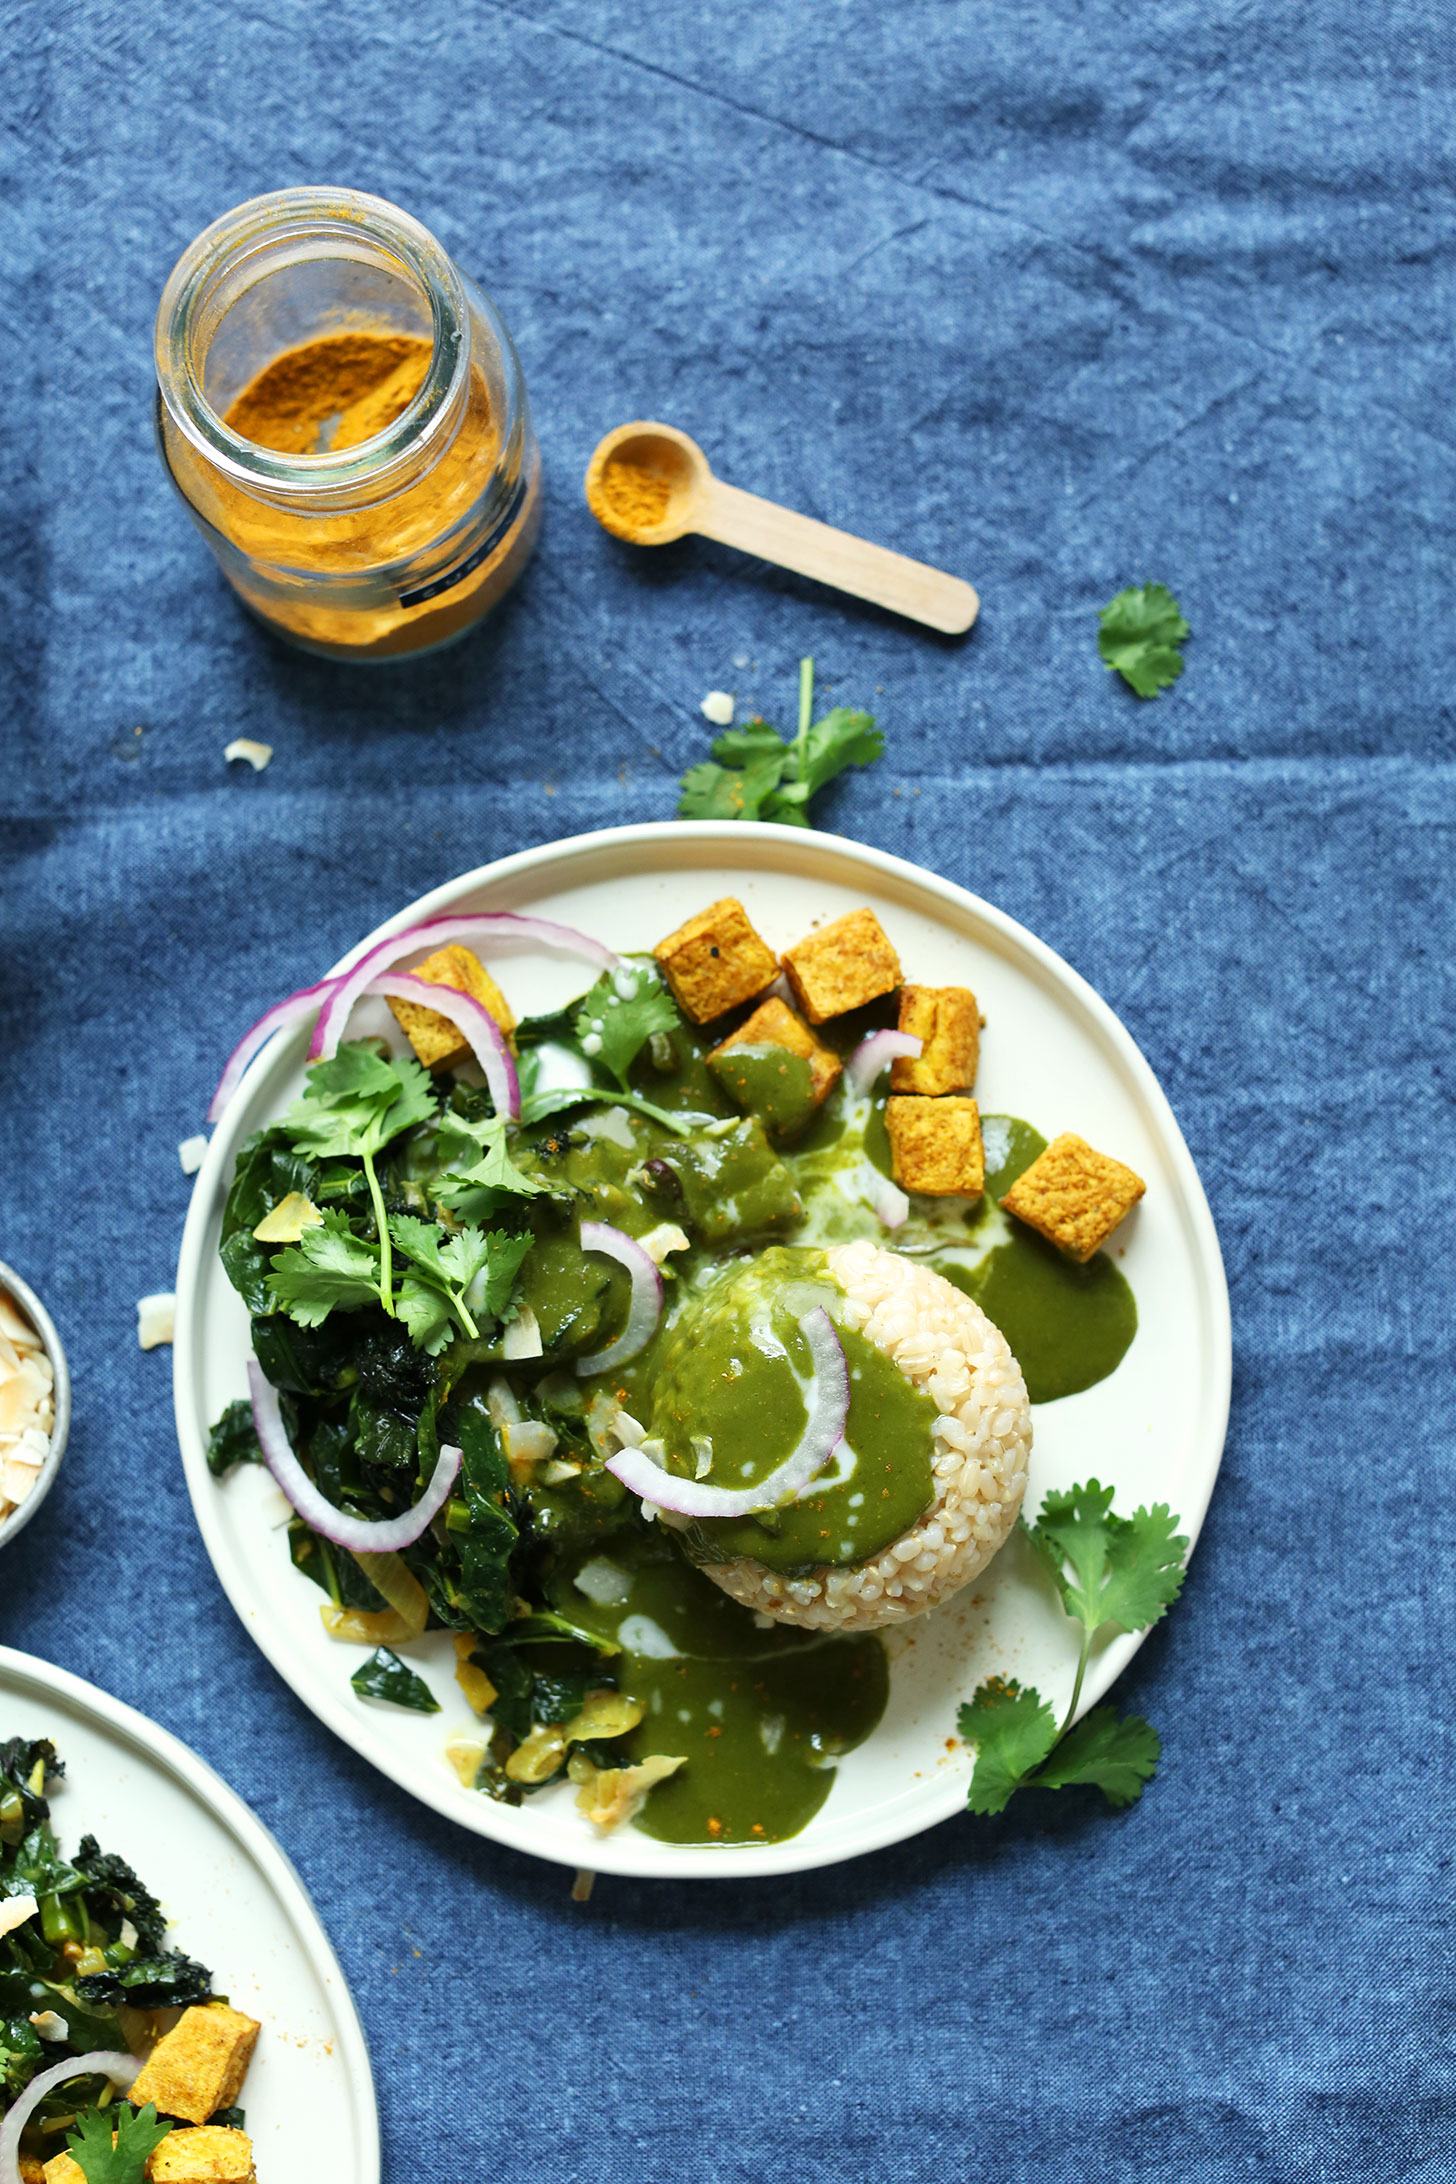 Top view of a plate of vibrant amazing Green Curry with tons of greens